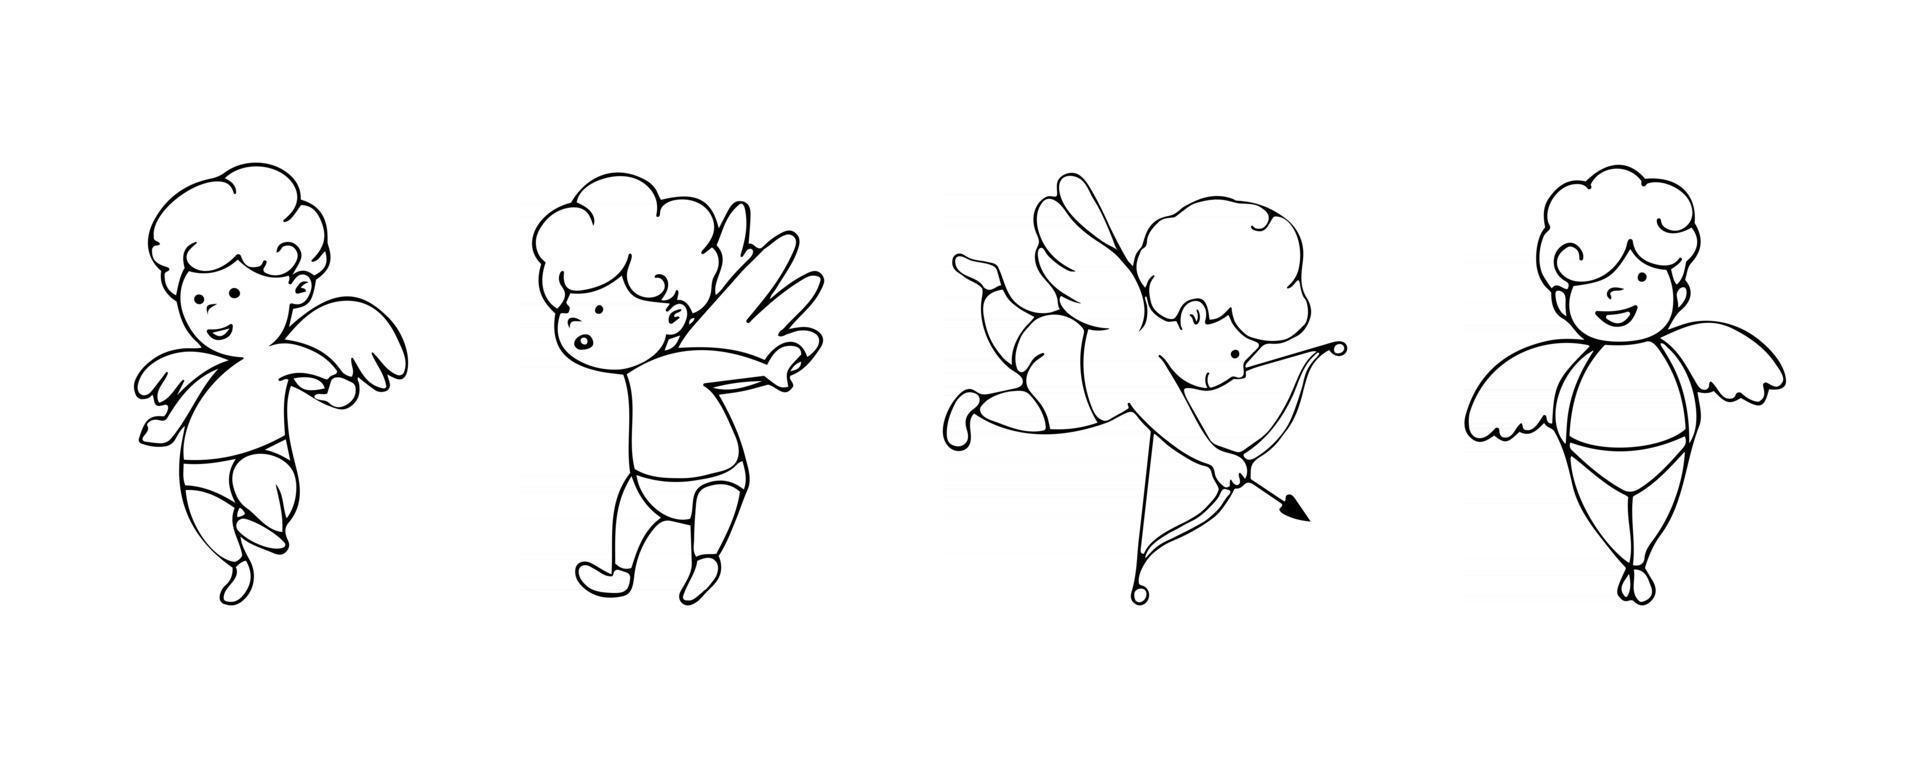 Set of cupids in cartoon sketch style isolated on the background. Simple collection of doodles with cupids. Outline vector illustration for Valentine's Day.